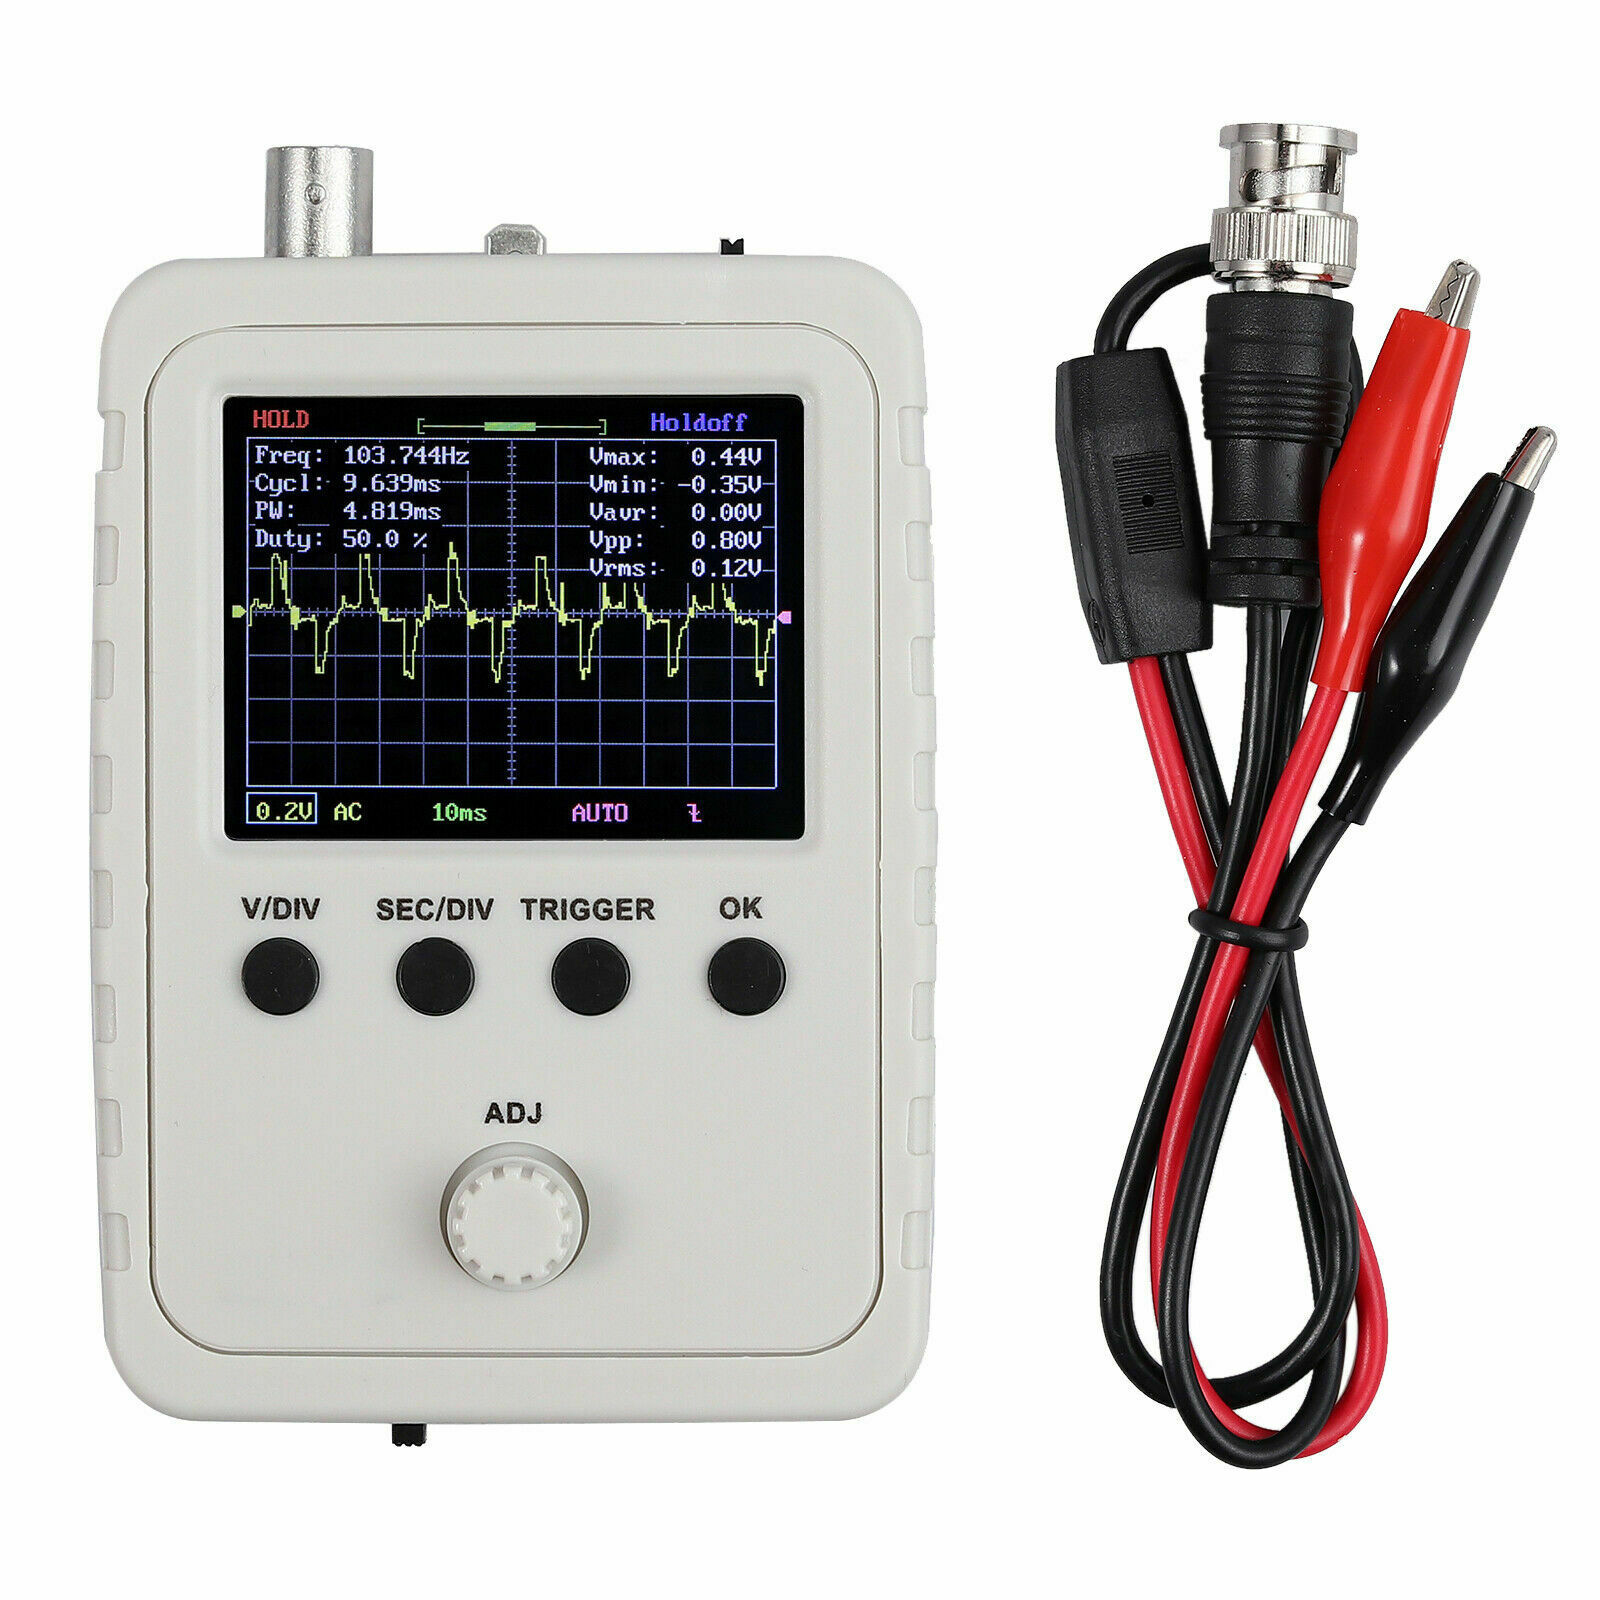 Assembled Dso150 Digital Oscilloscope 2.4" Lcd Display With Case Test Clip Power